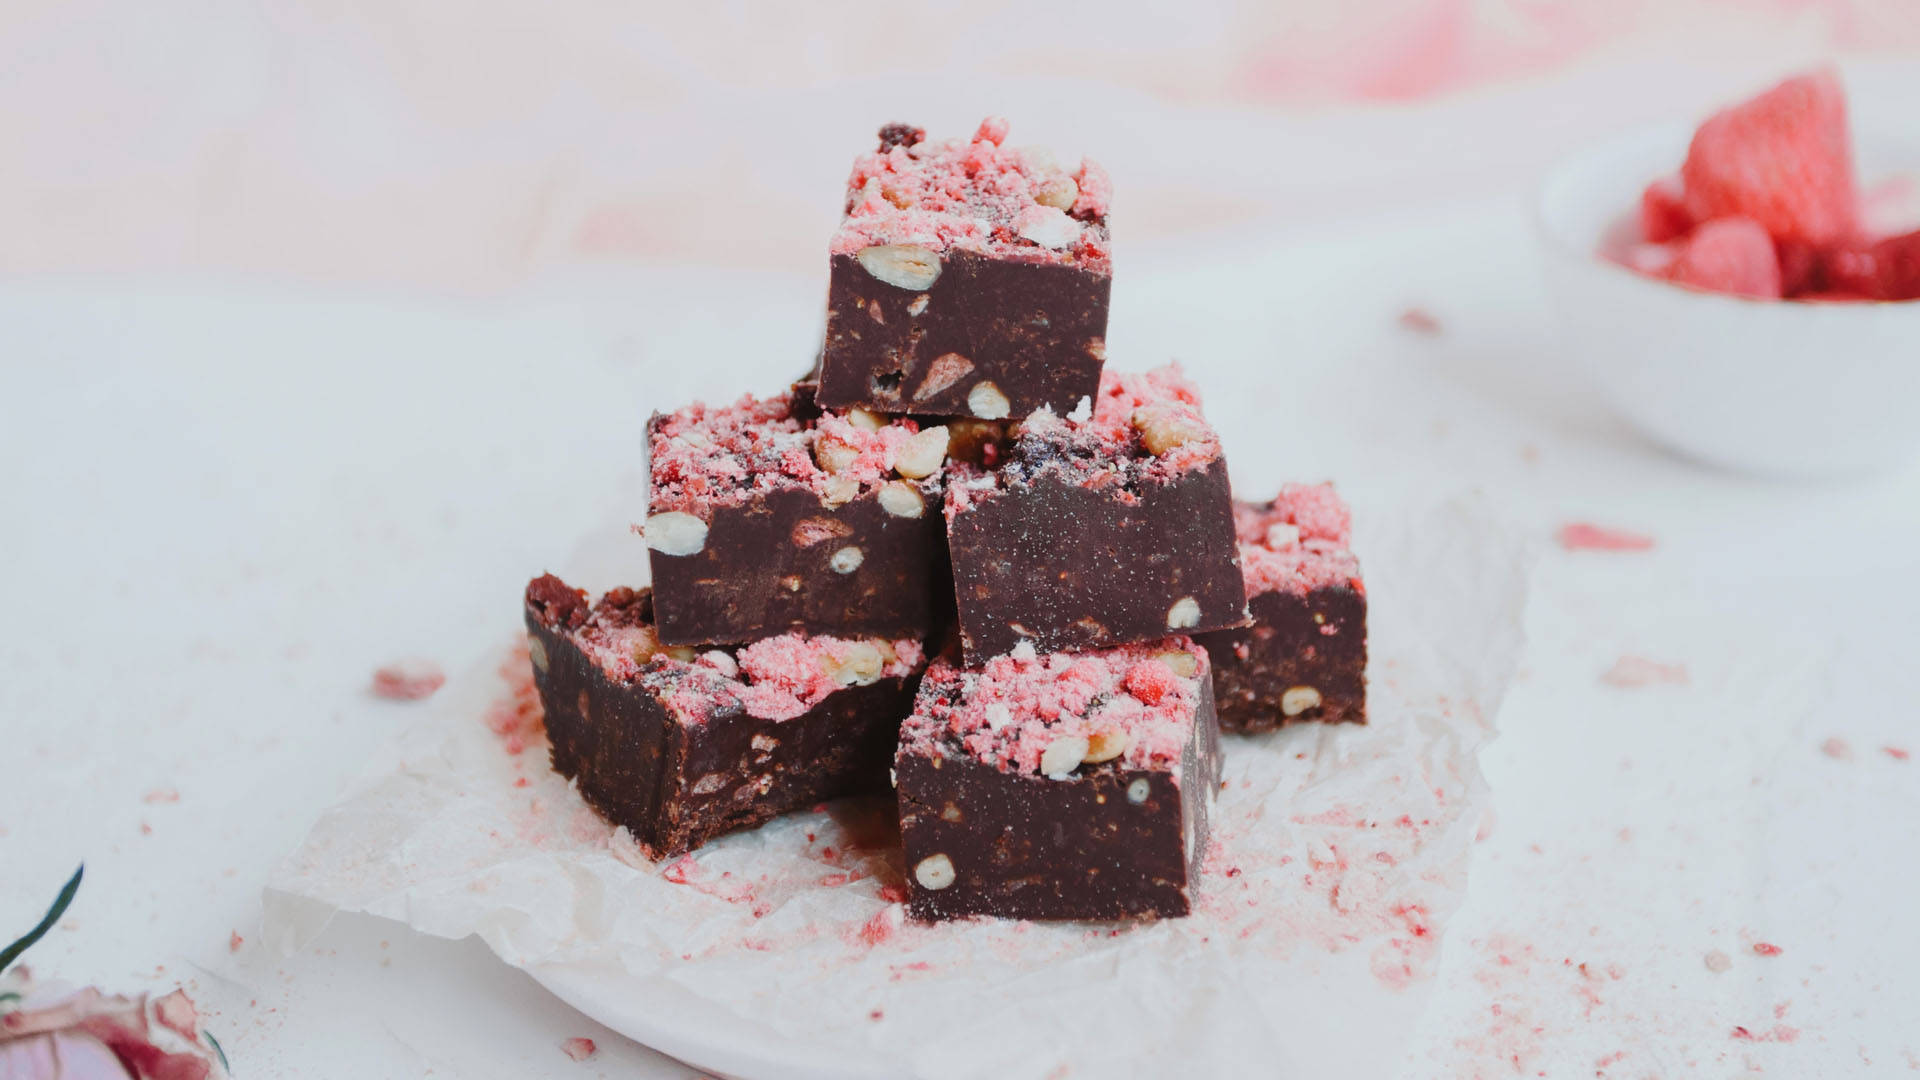 Featured image for “Valentine’s Day Fudge”